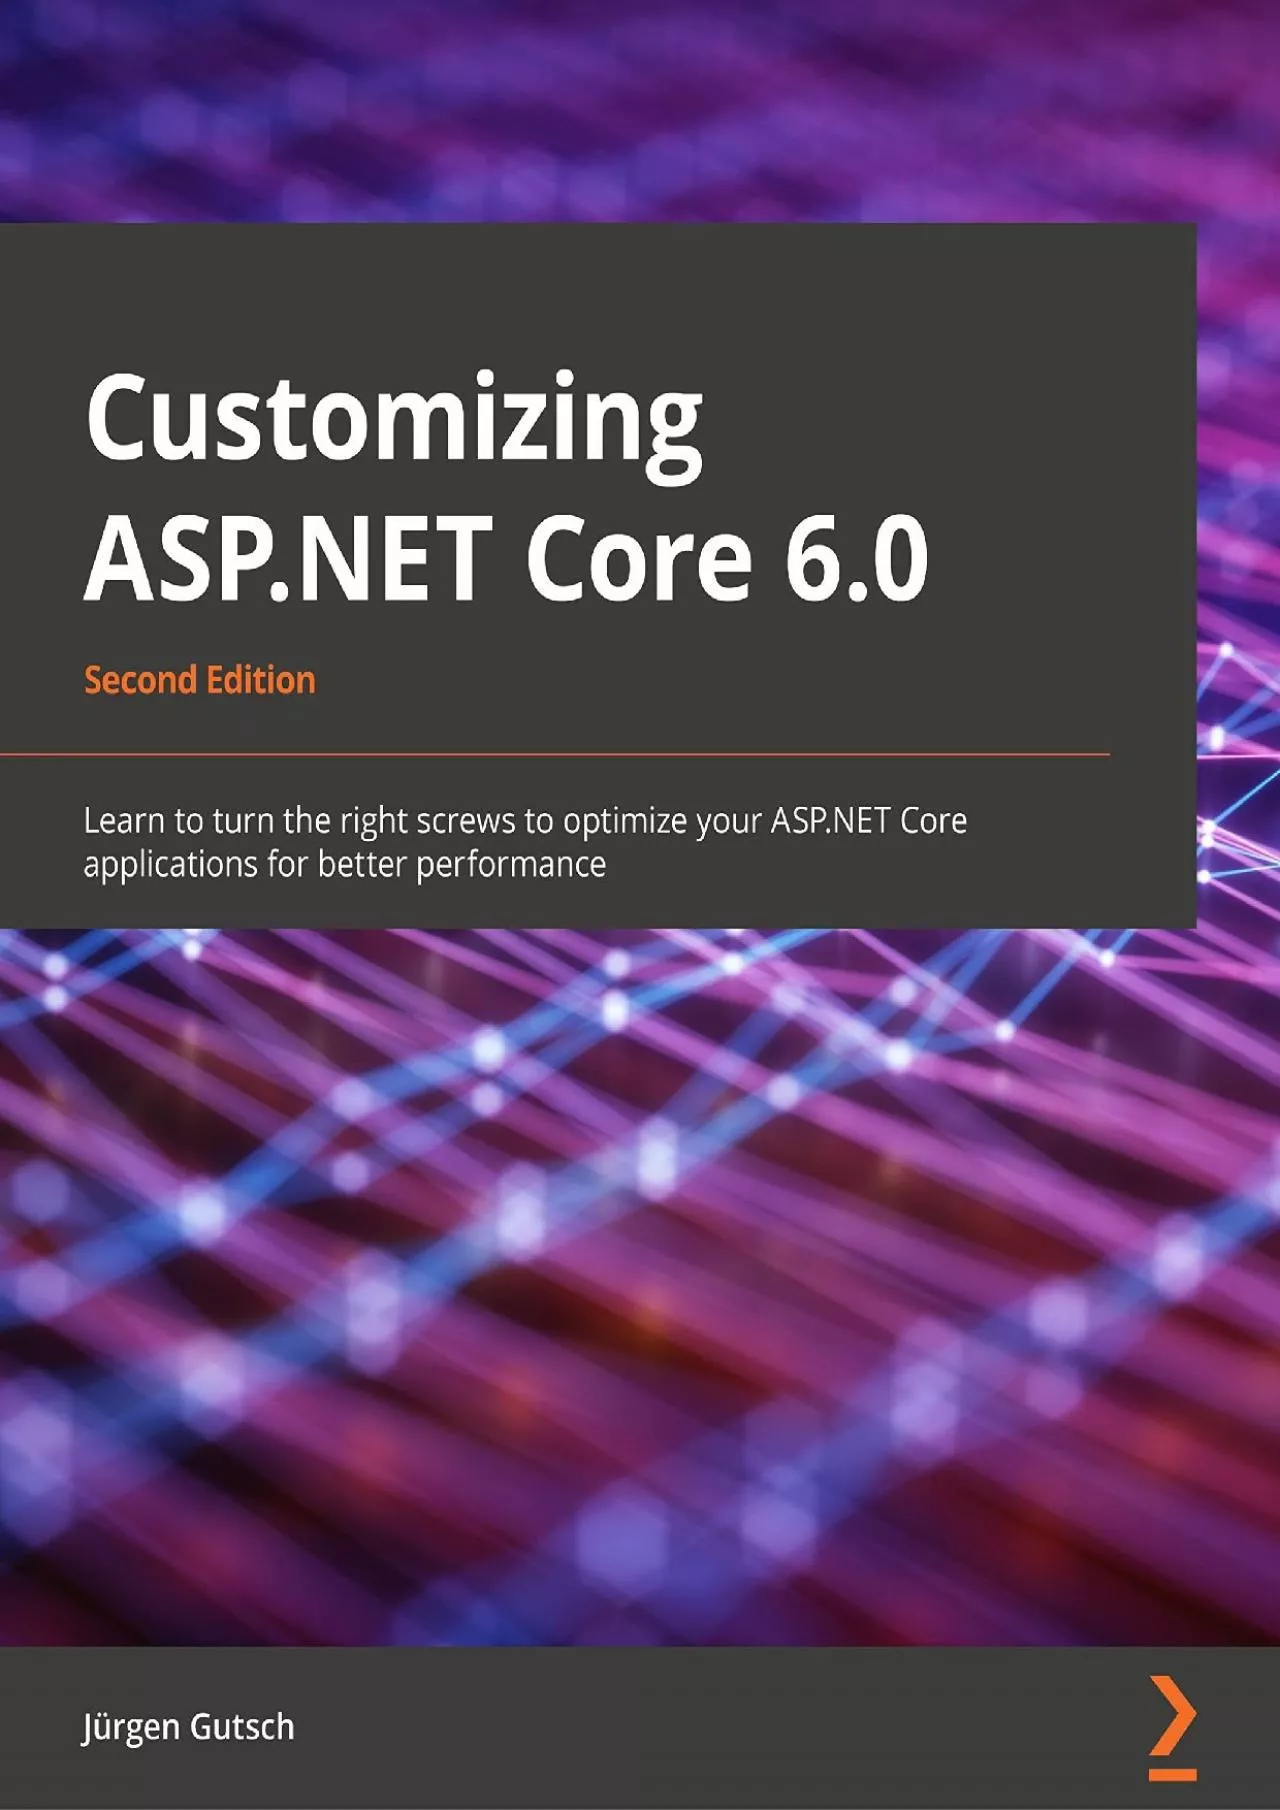 [BEST]-Customizing ASP.NET Core 6.0: Learn to turn the right screws to optimize ASP.NET